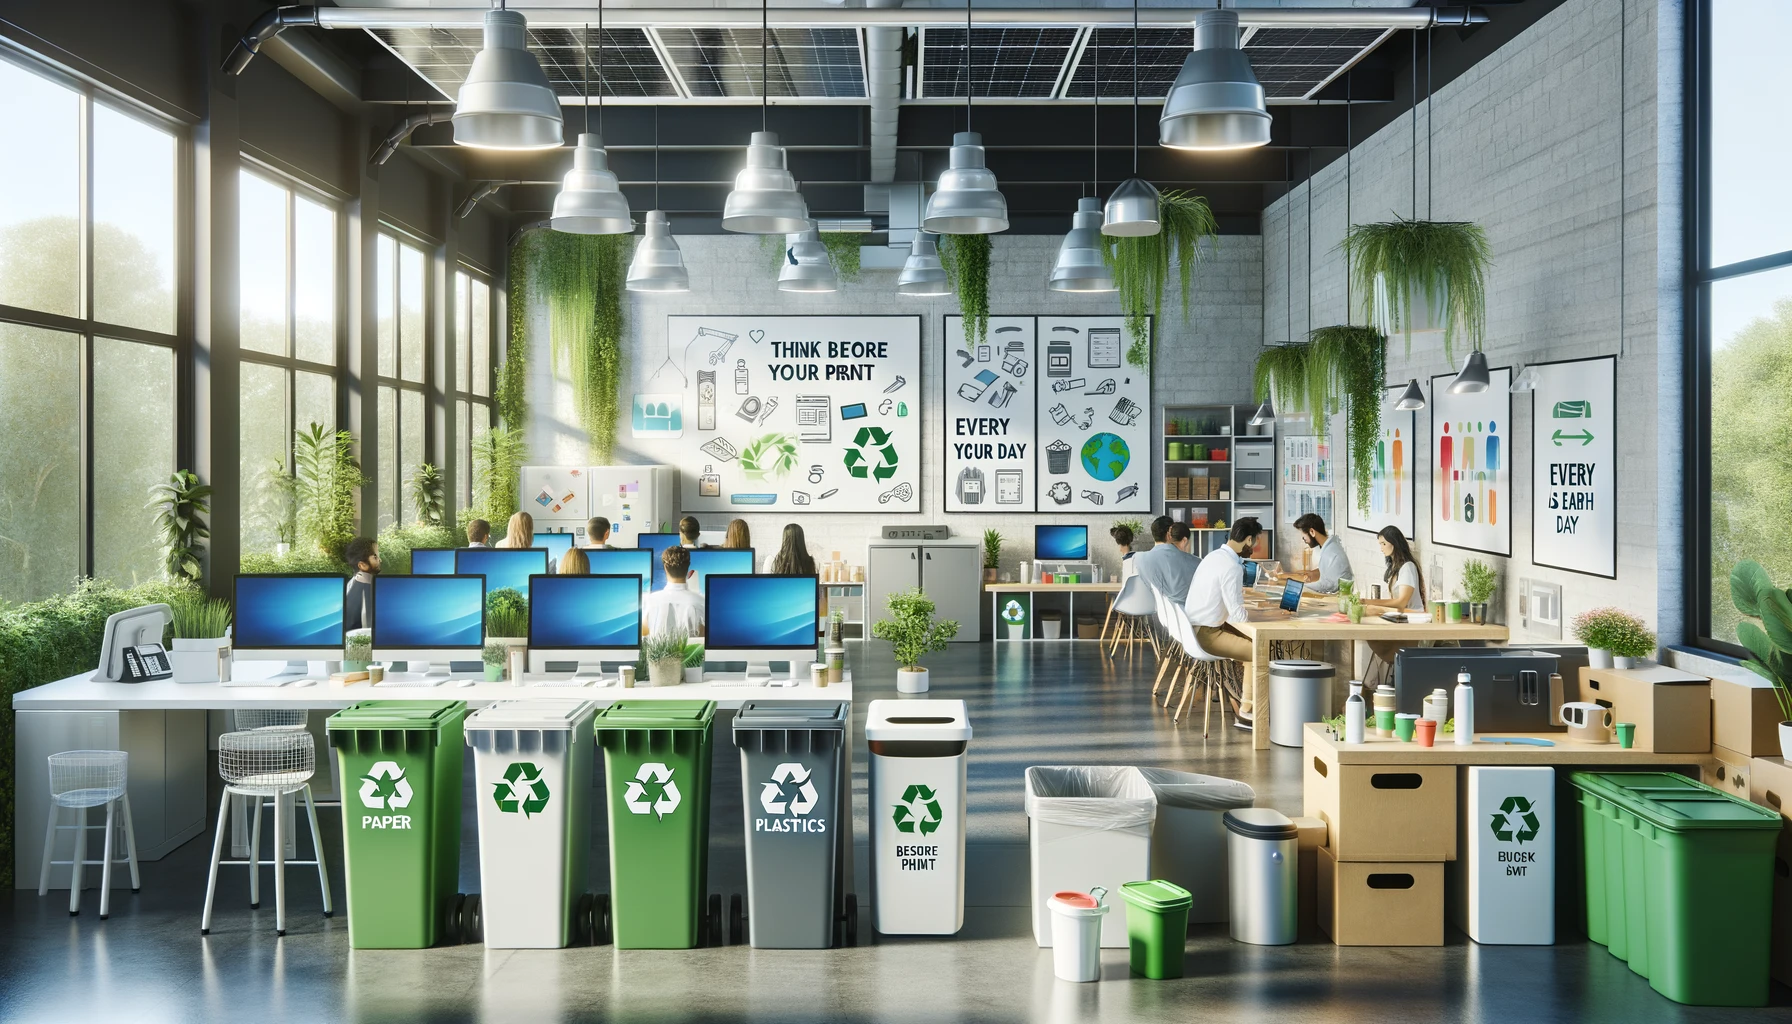 The image represents waste reduction in an office for better resource management and operational efficiency. 